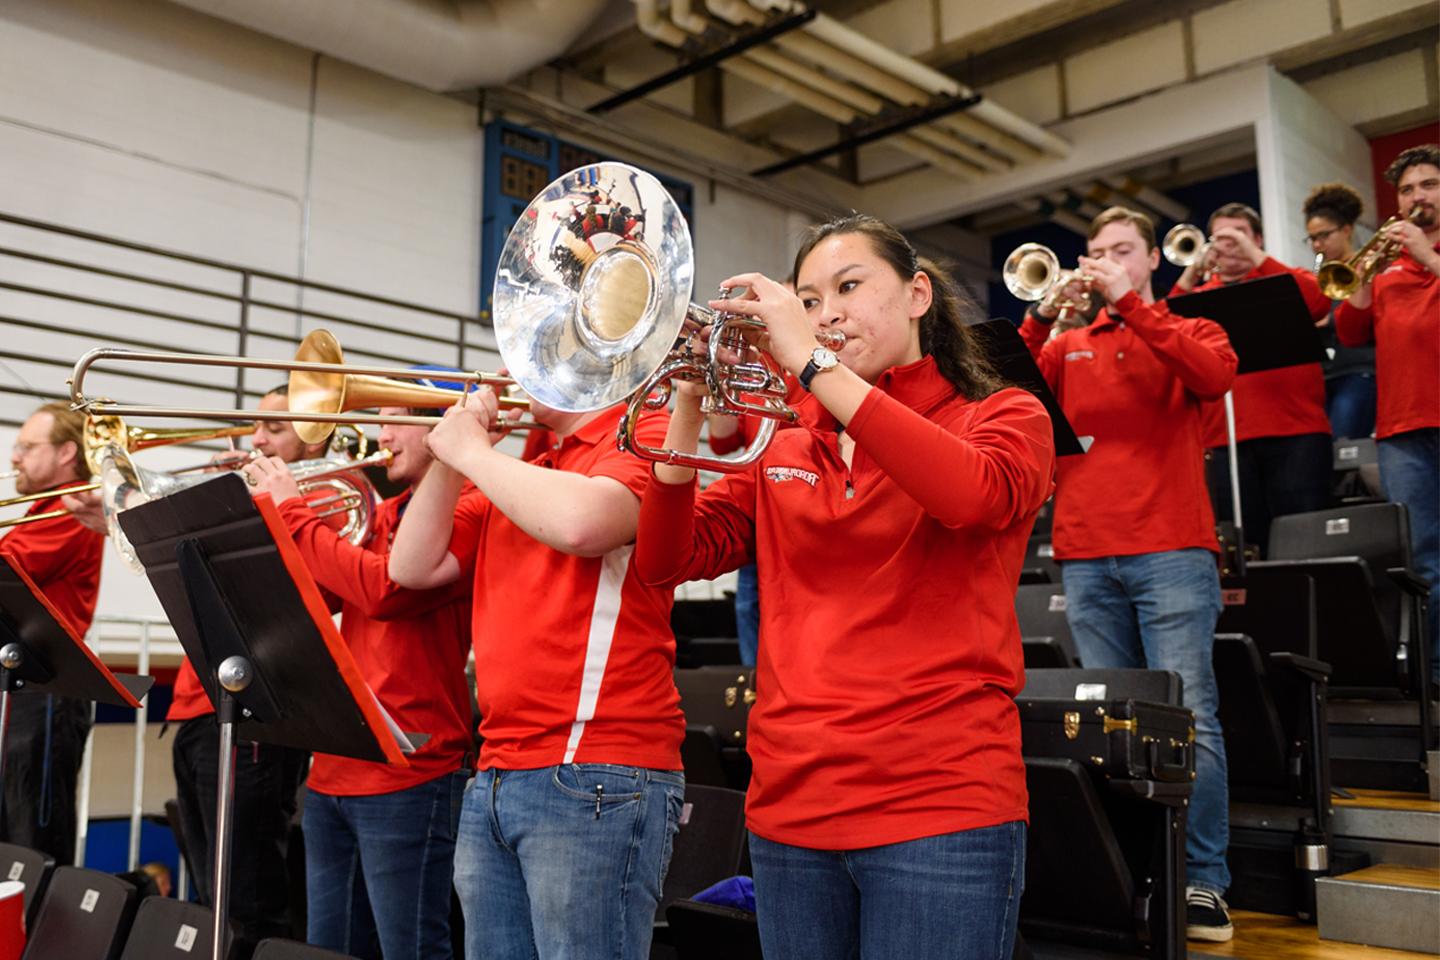 Group of pep band musicians in red playing in a basketball court